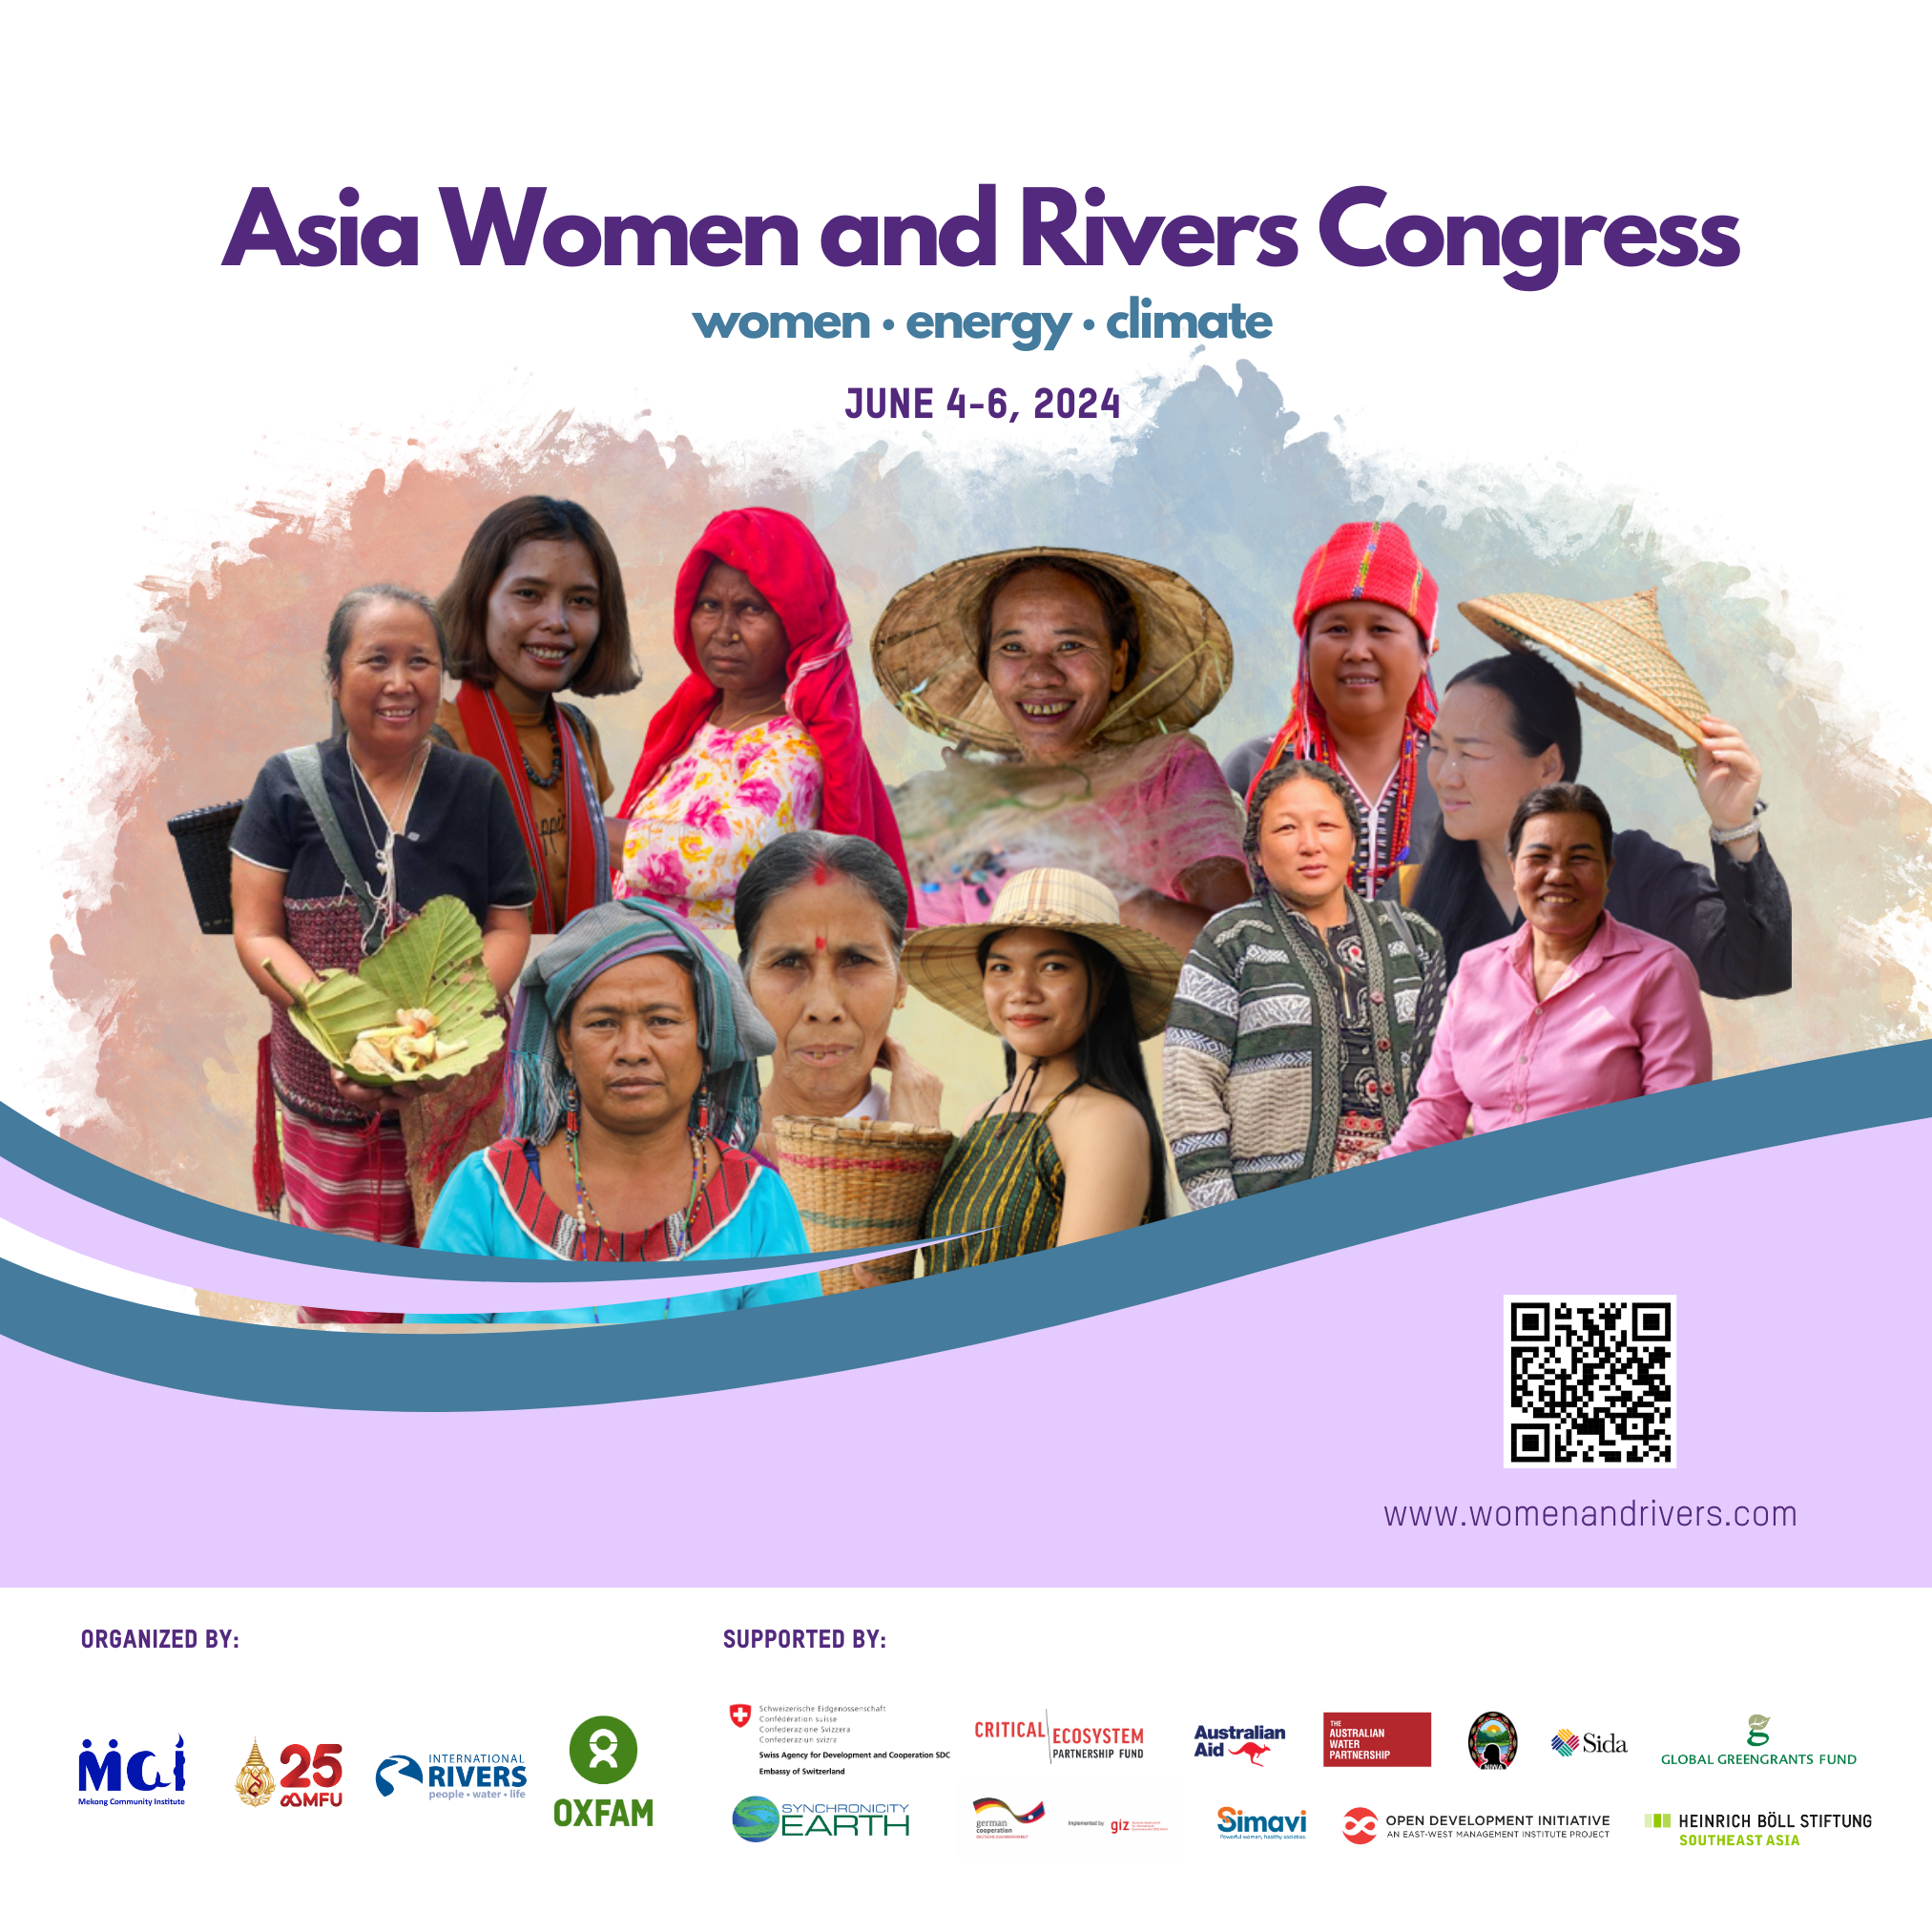 Women and Rivers Congress 2024